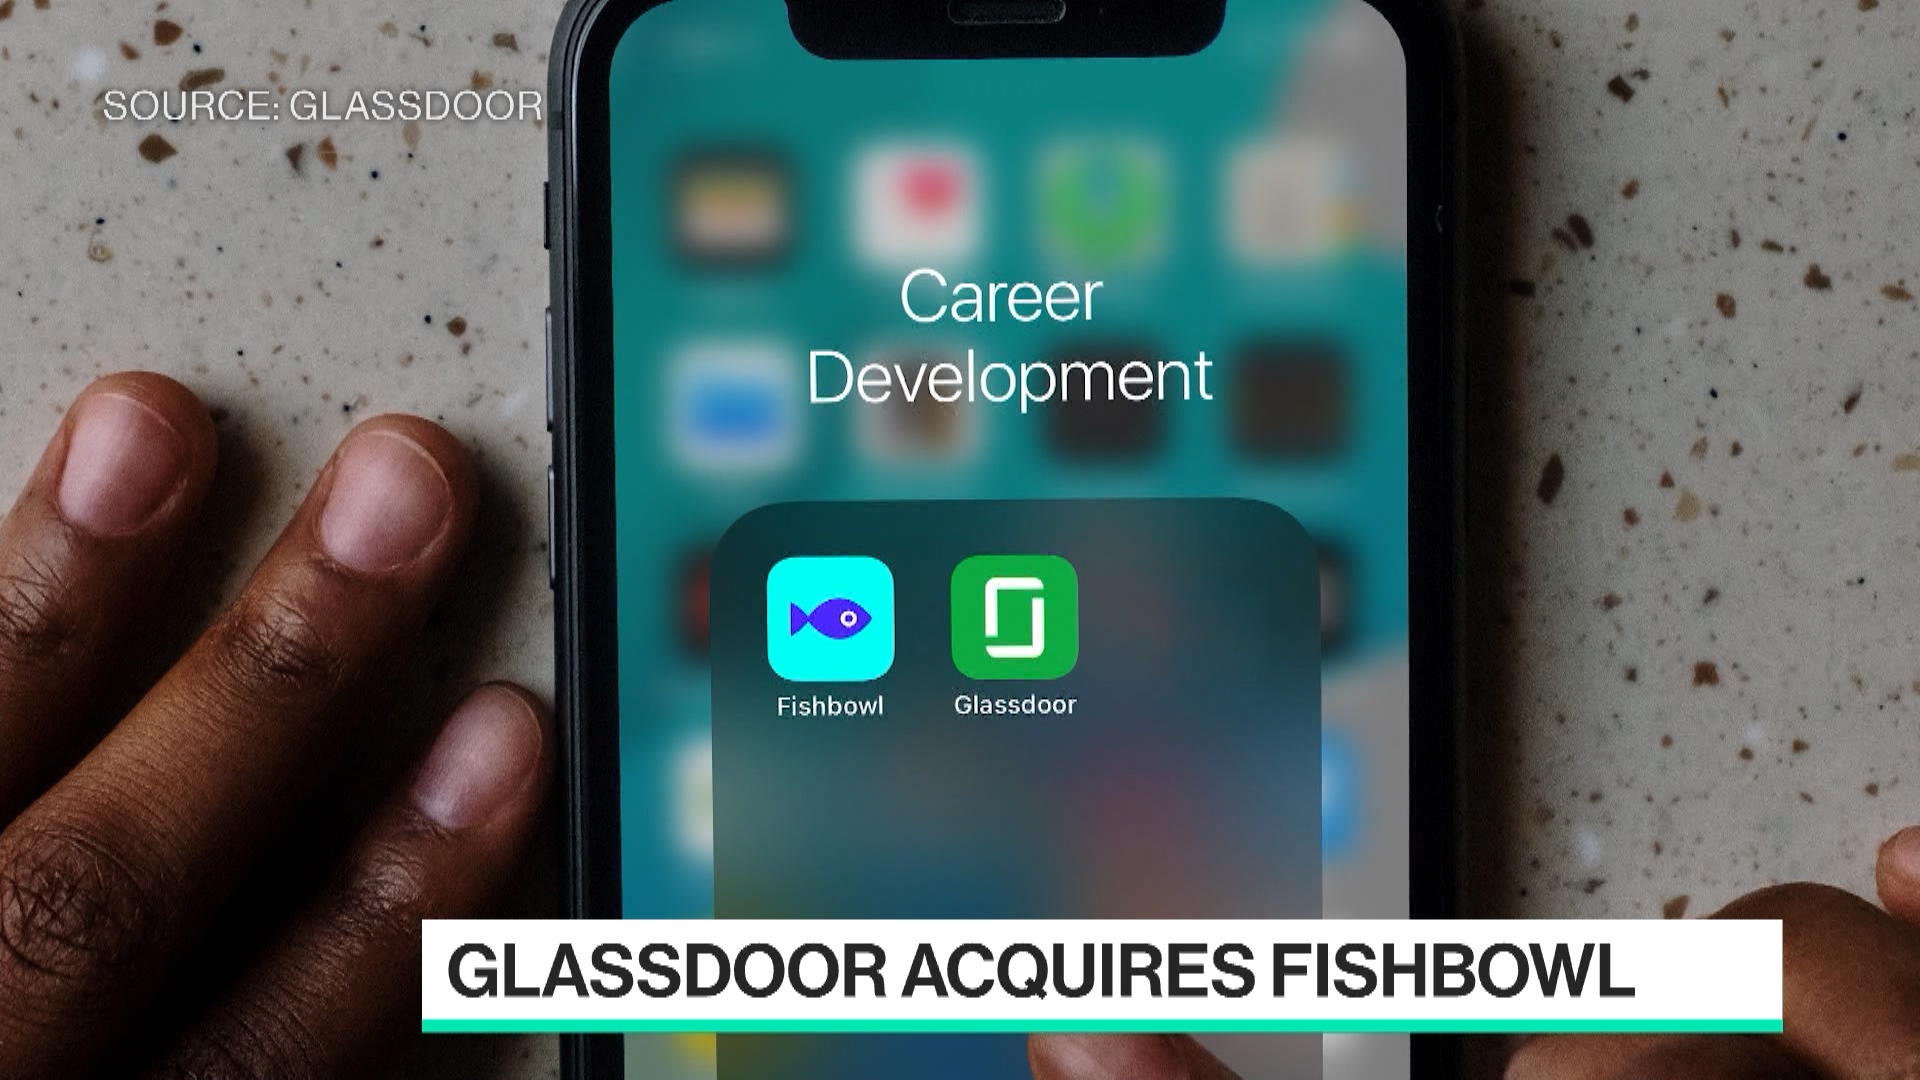 Glassdoor Acquires Fishbowl, Expands Social Networking